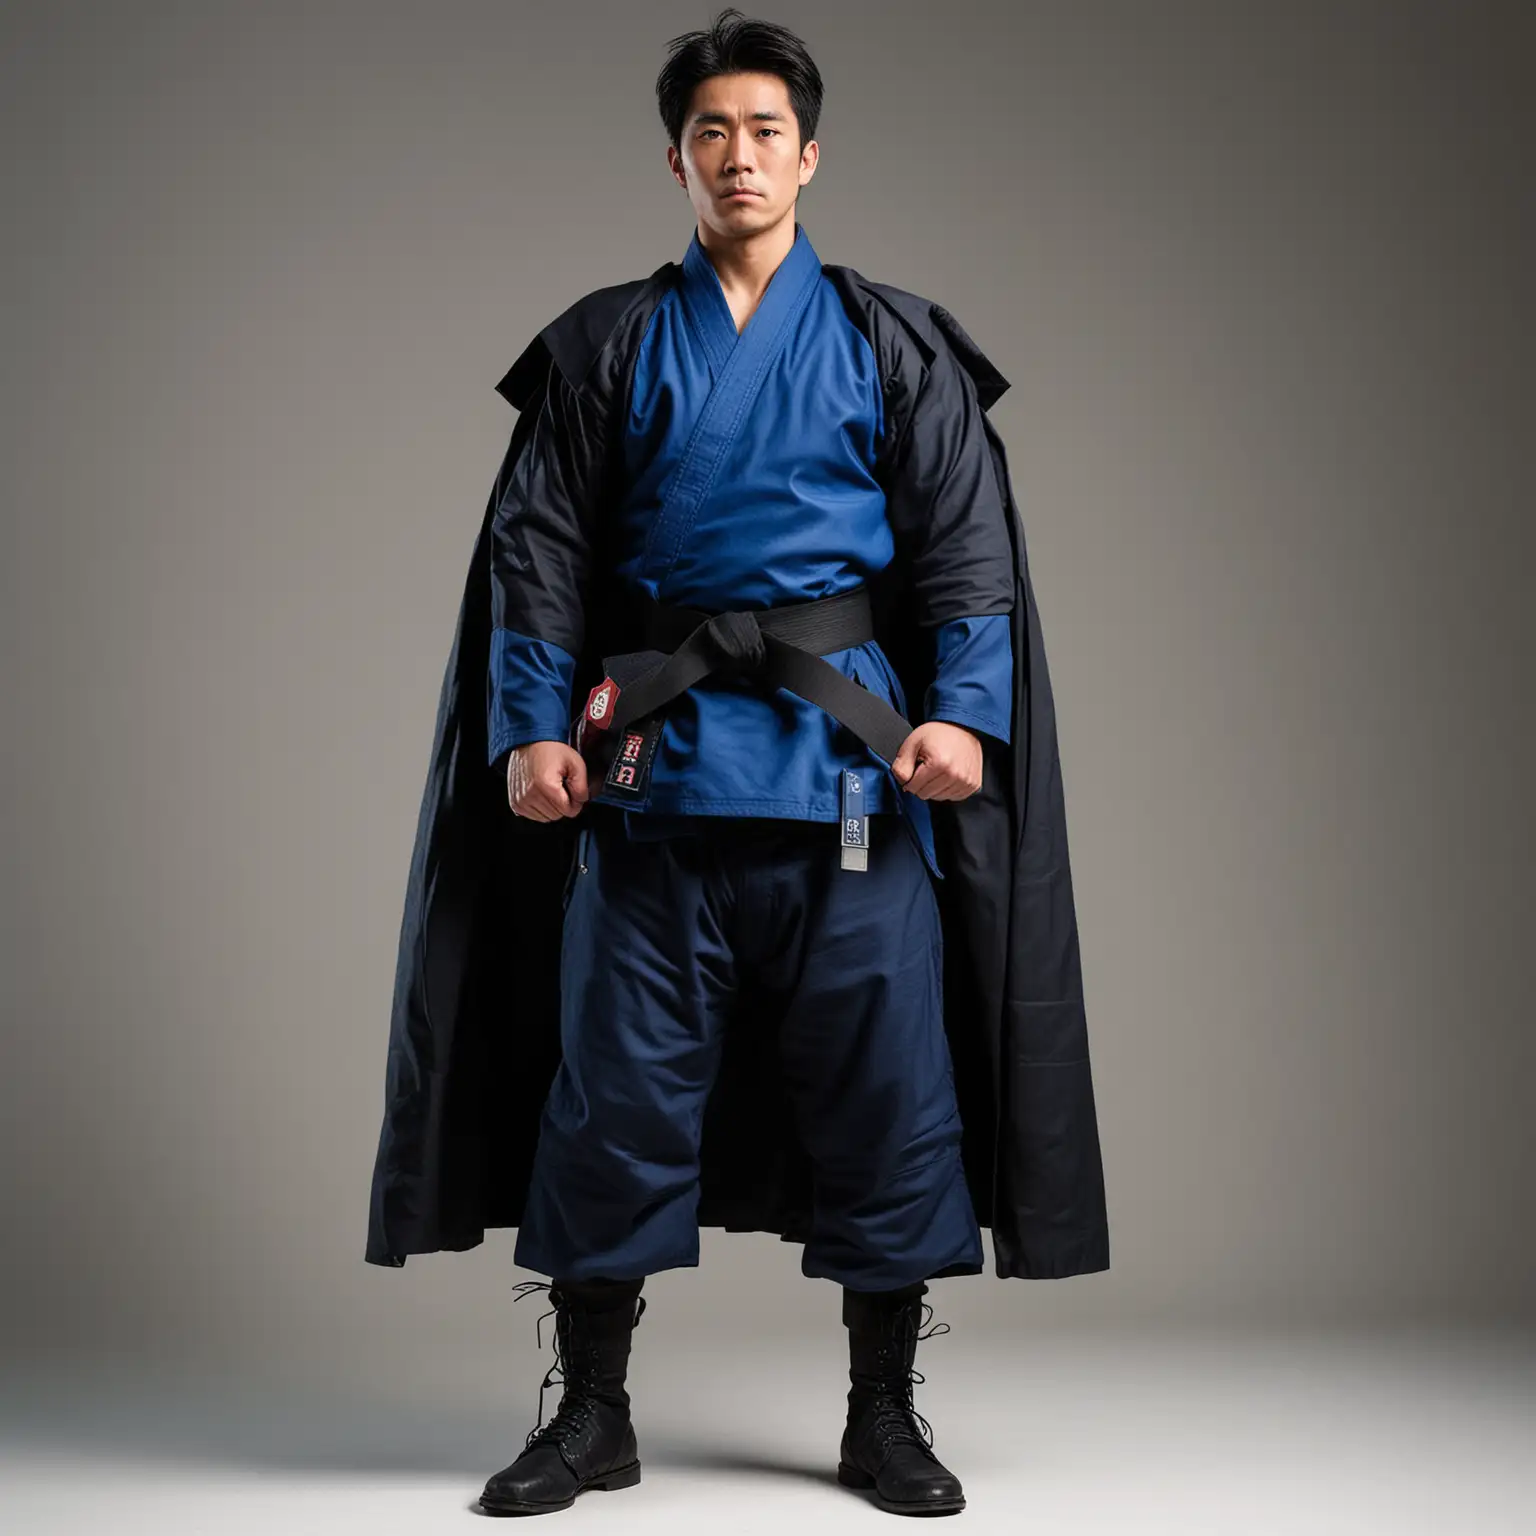 Strong Japanese Karate Fighter in Blue Gi with Samurai Pants and Cape